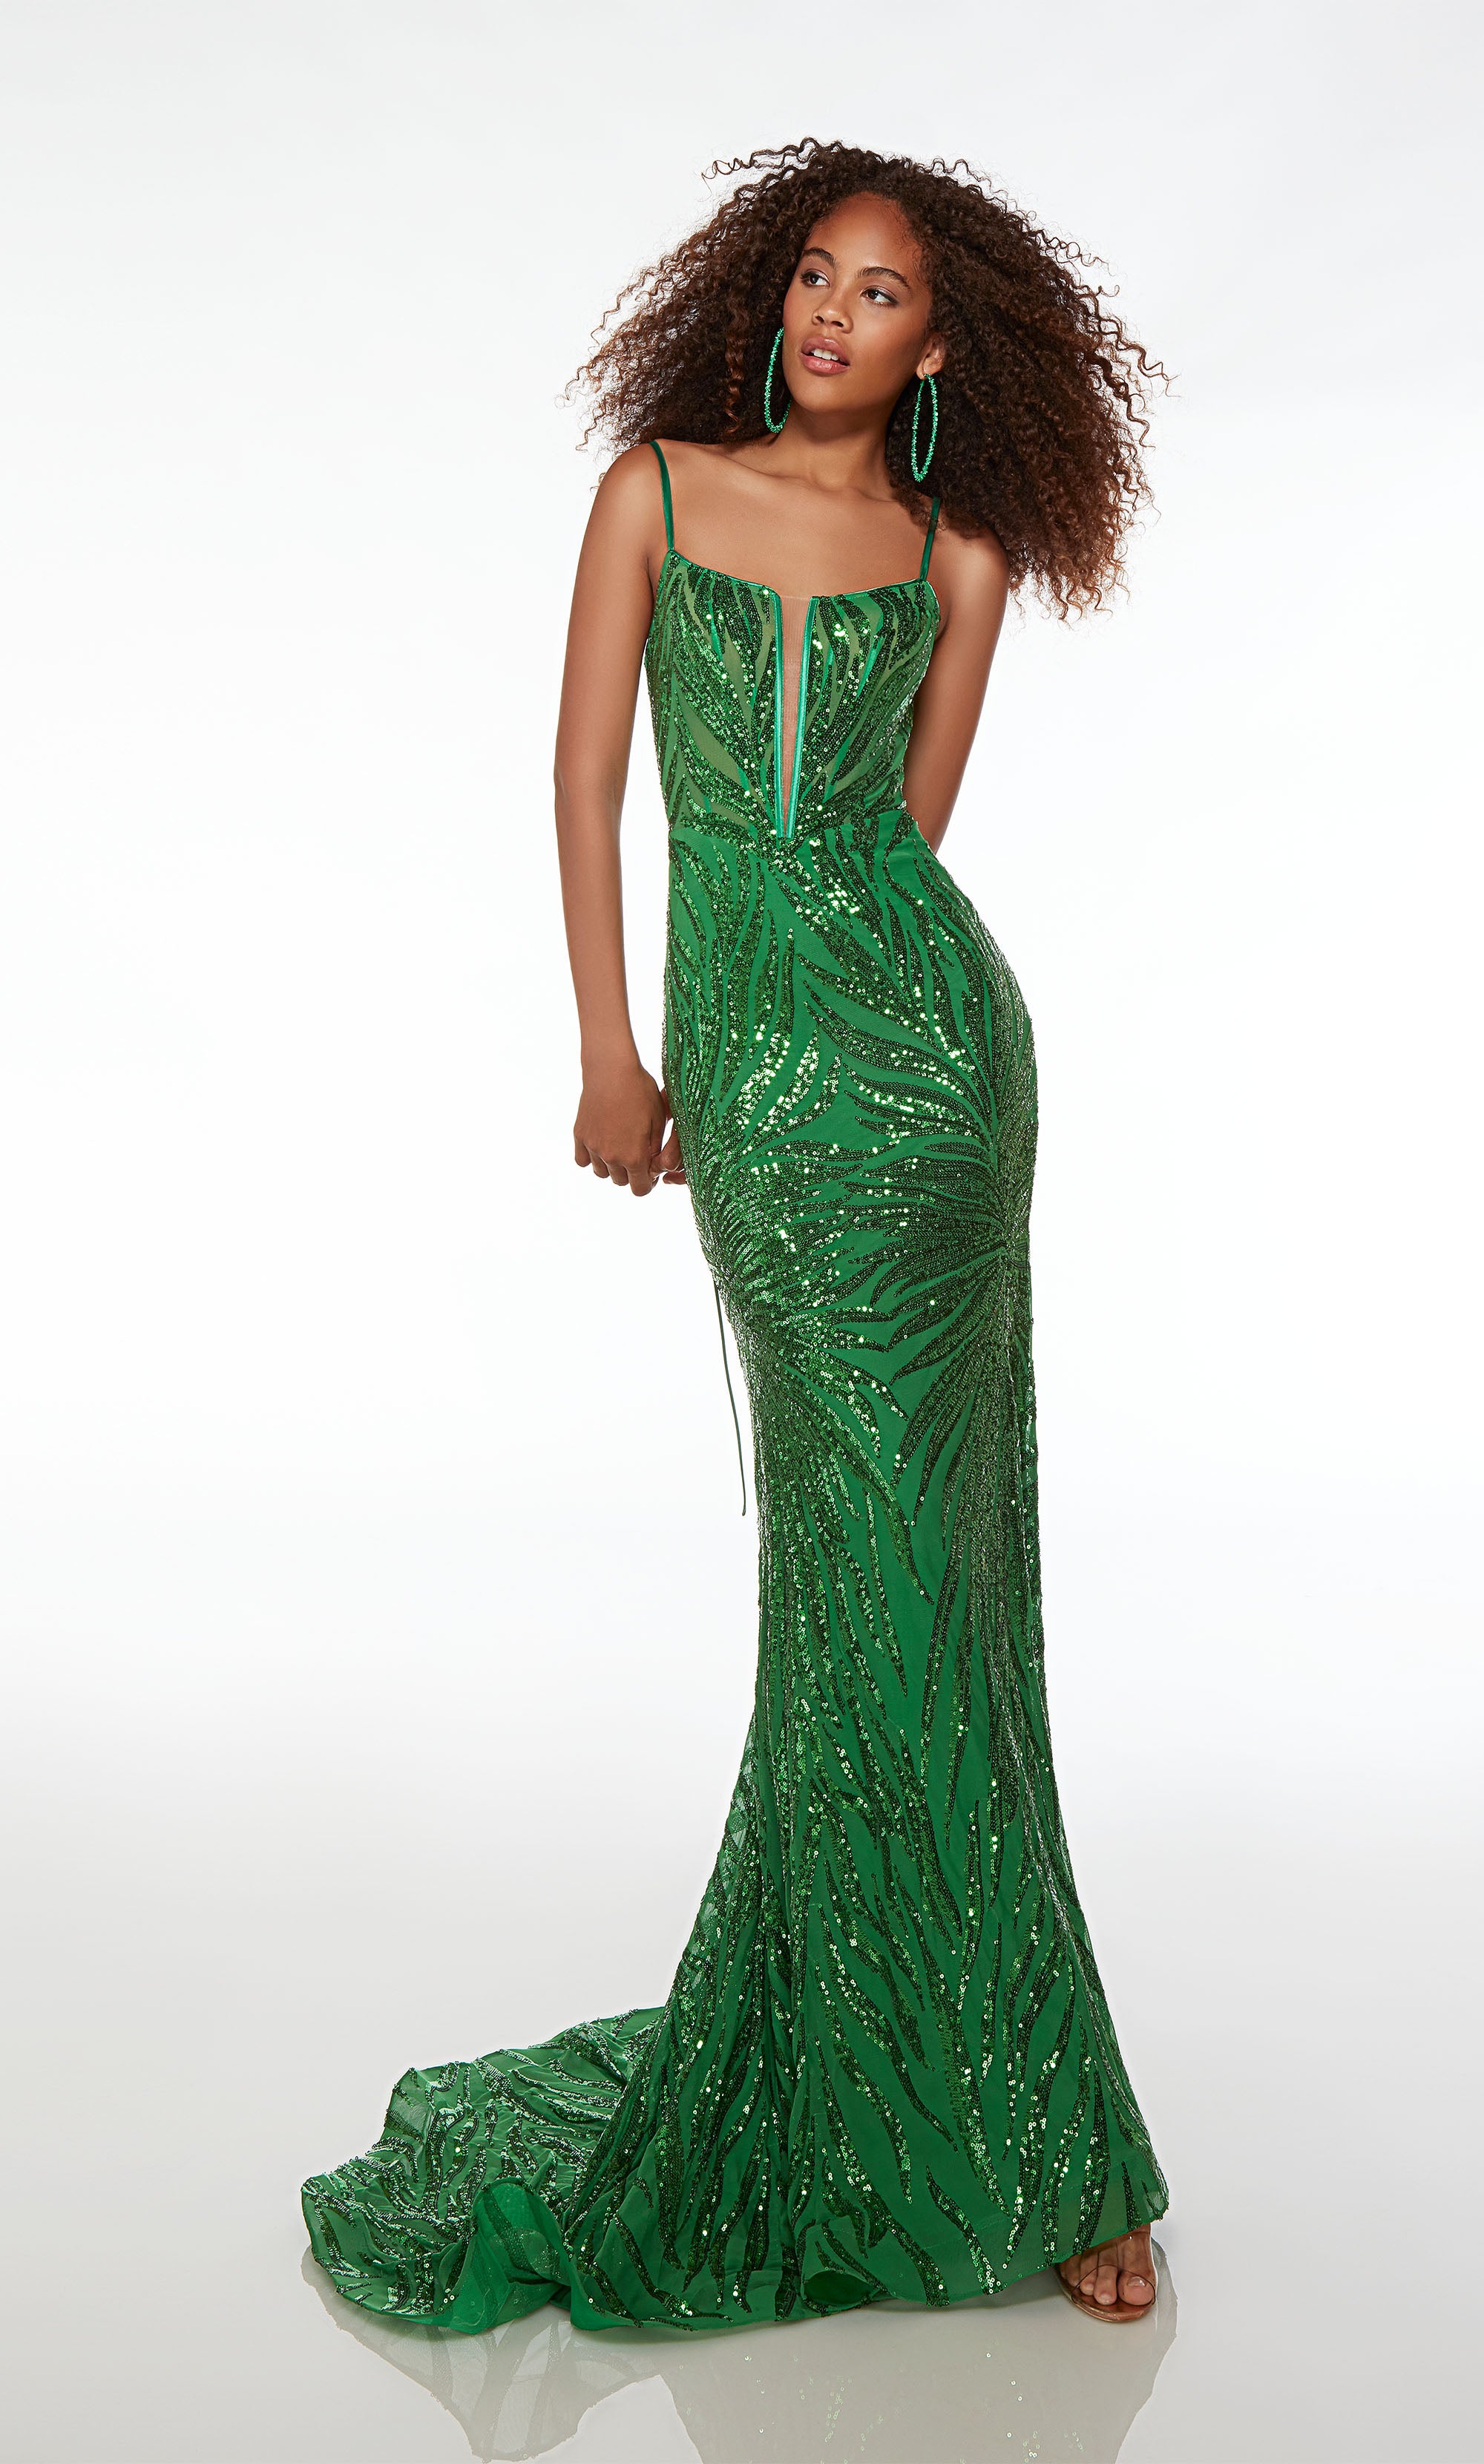 Green prom dress with an plunging neckline, spaghetti straps, lace-up back, train, and an unique sequin design throughout for an refreshing and stylish look.